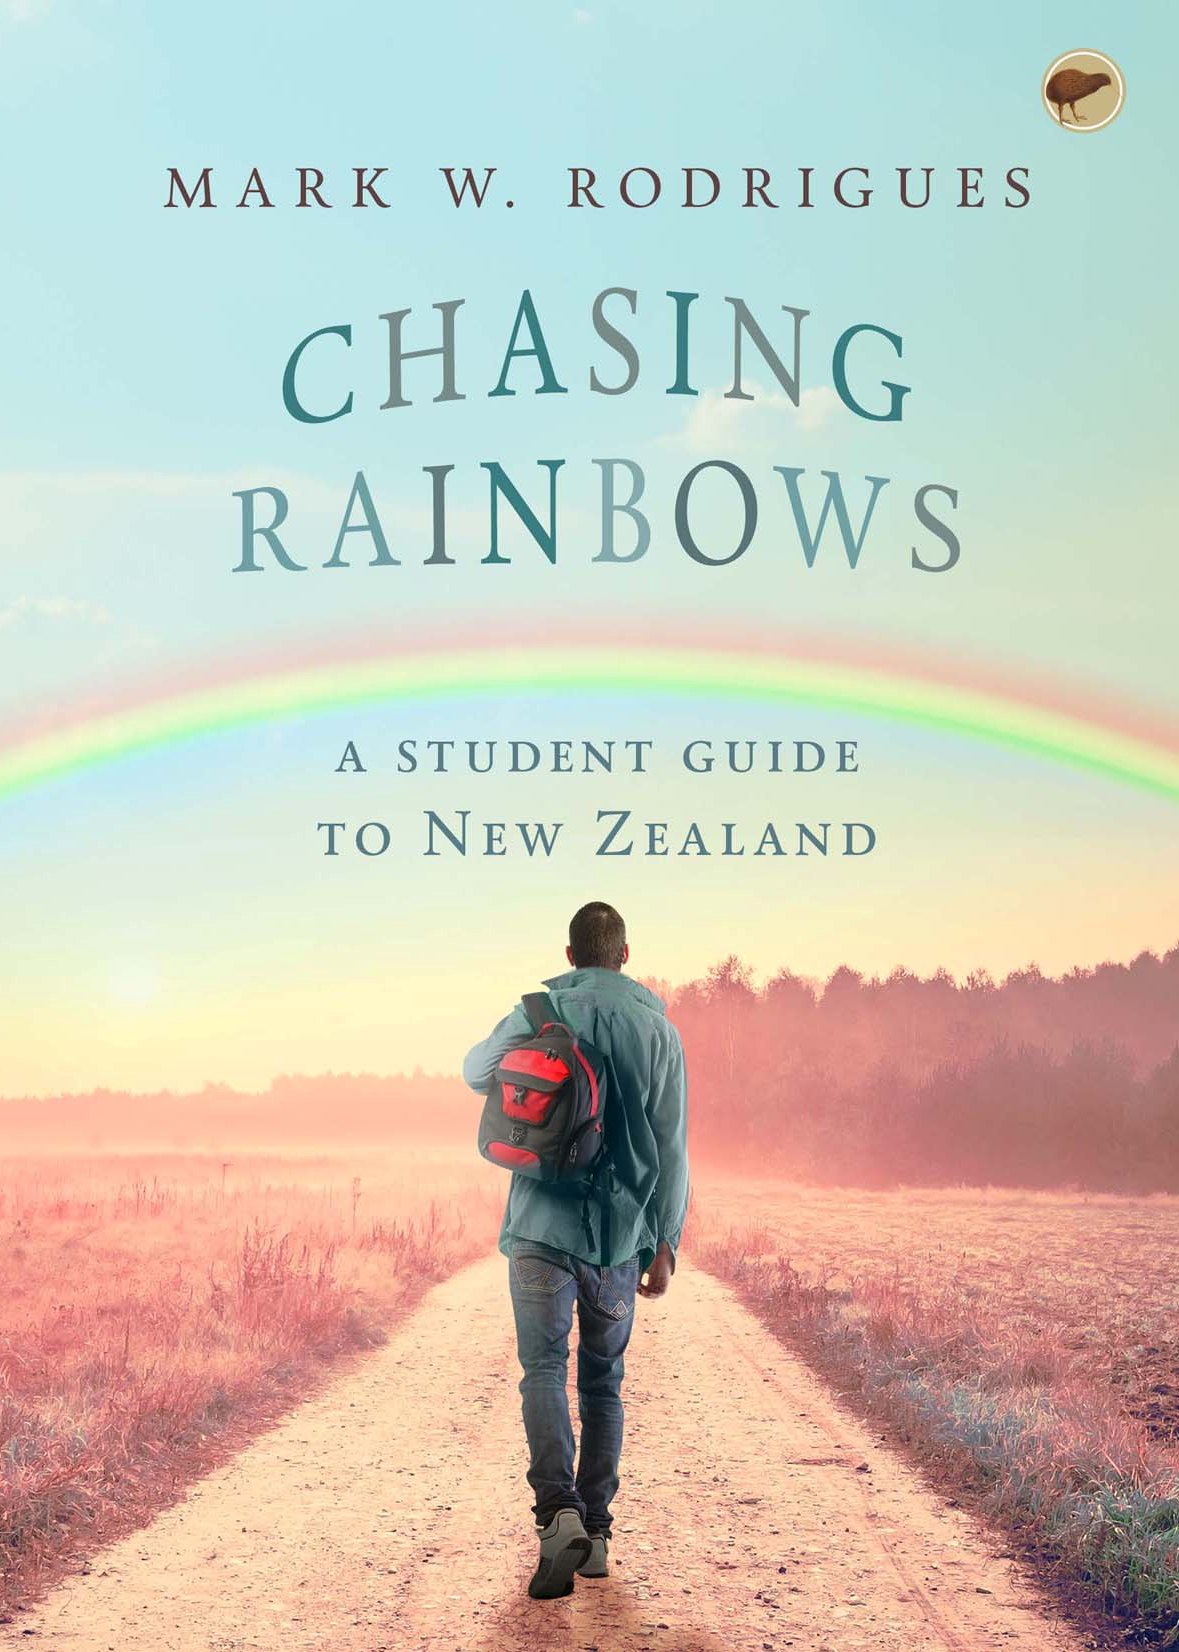 Chasing Rainbows - A Student Guide to New Zealand